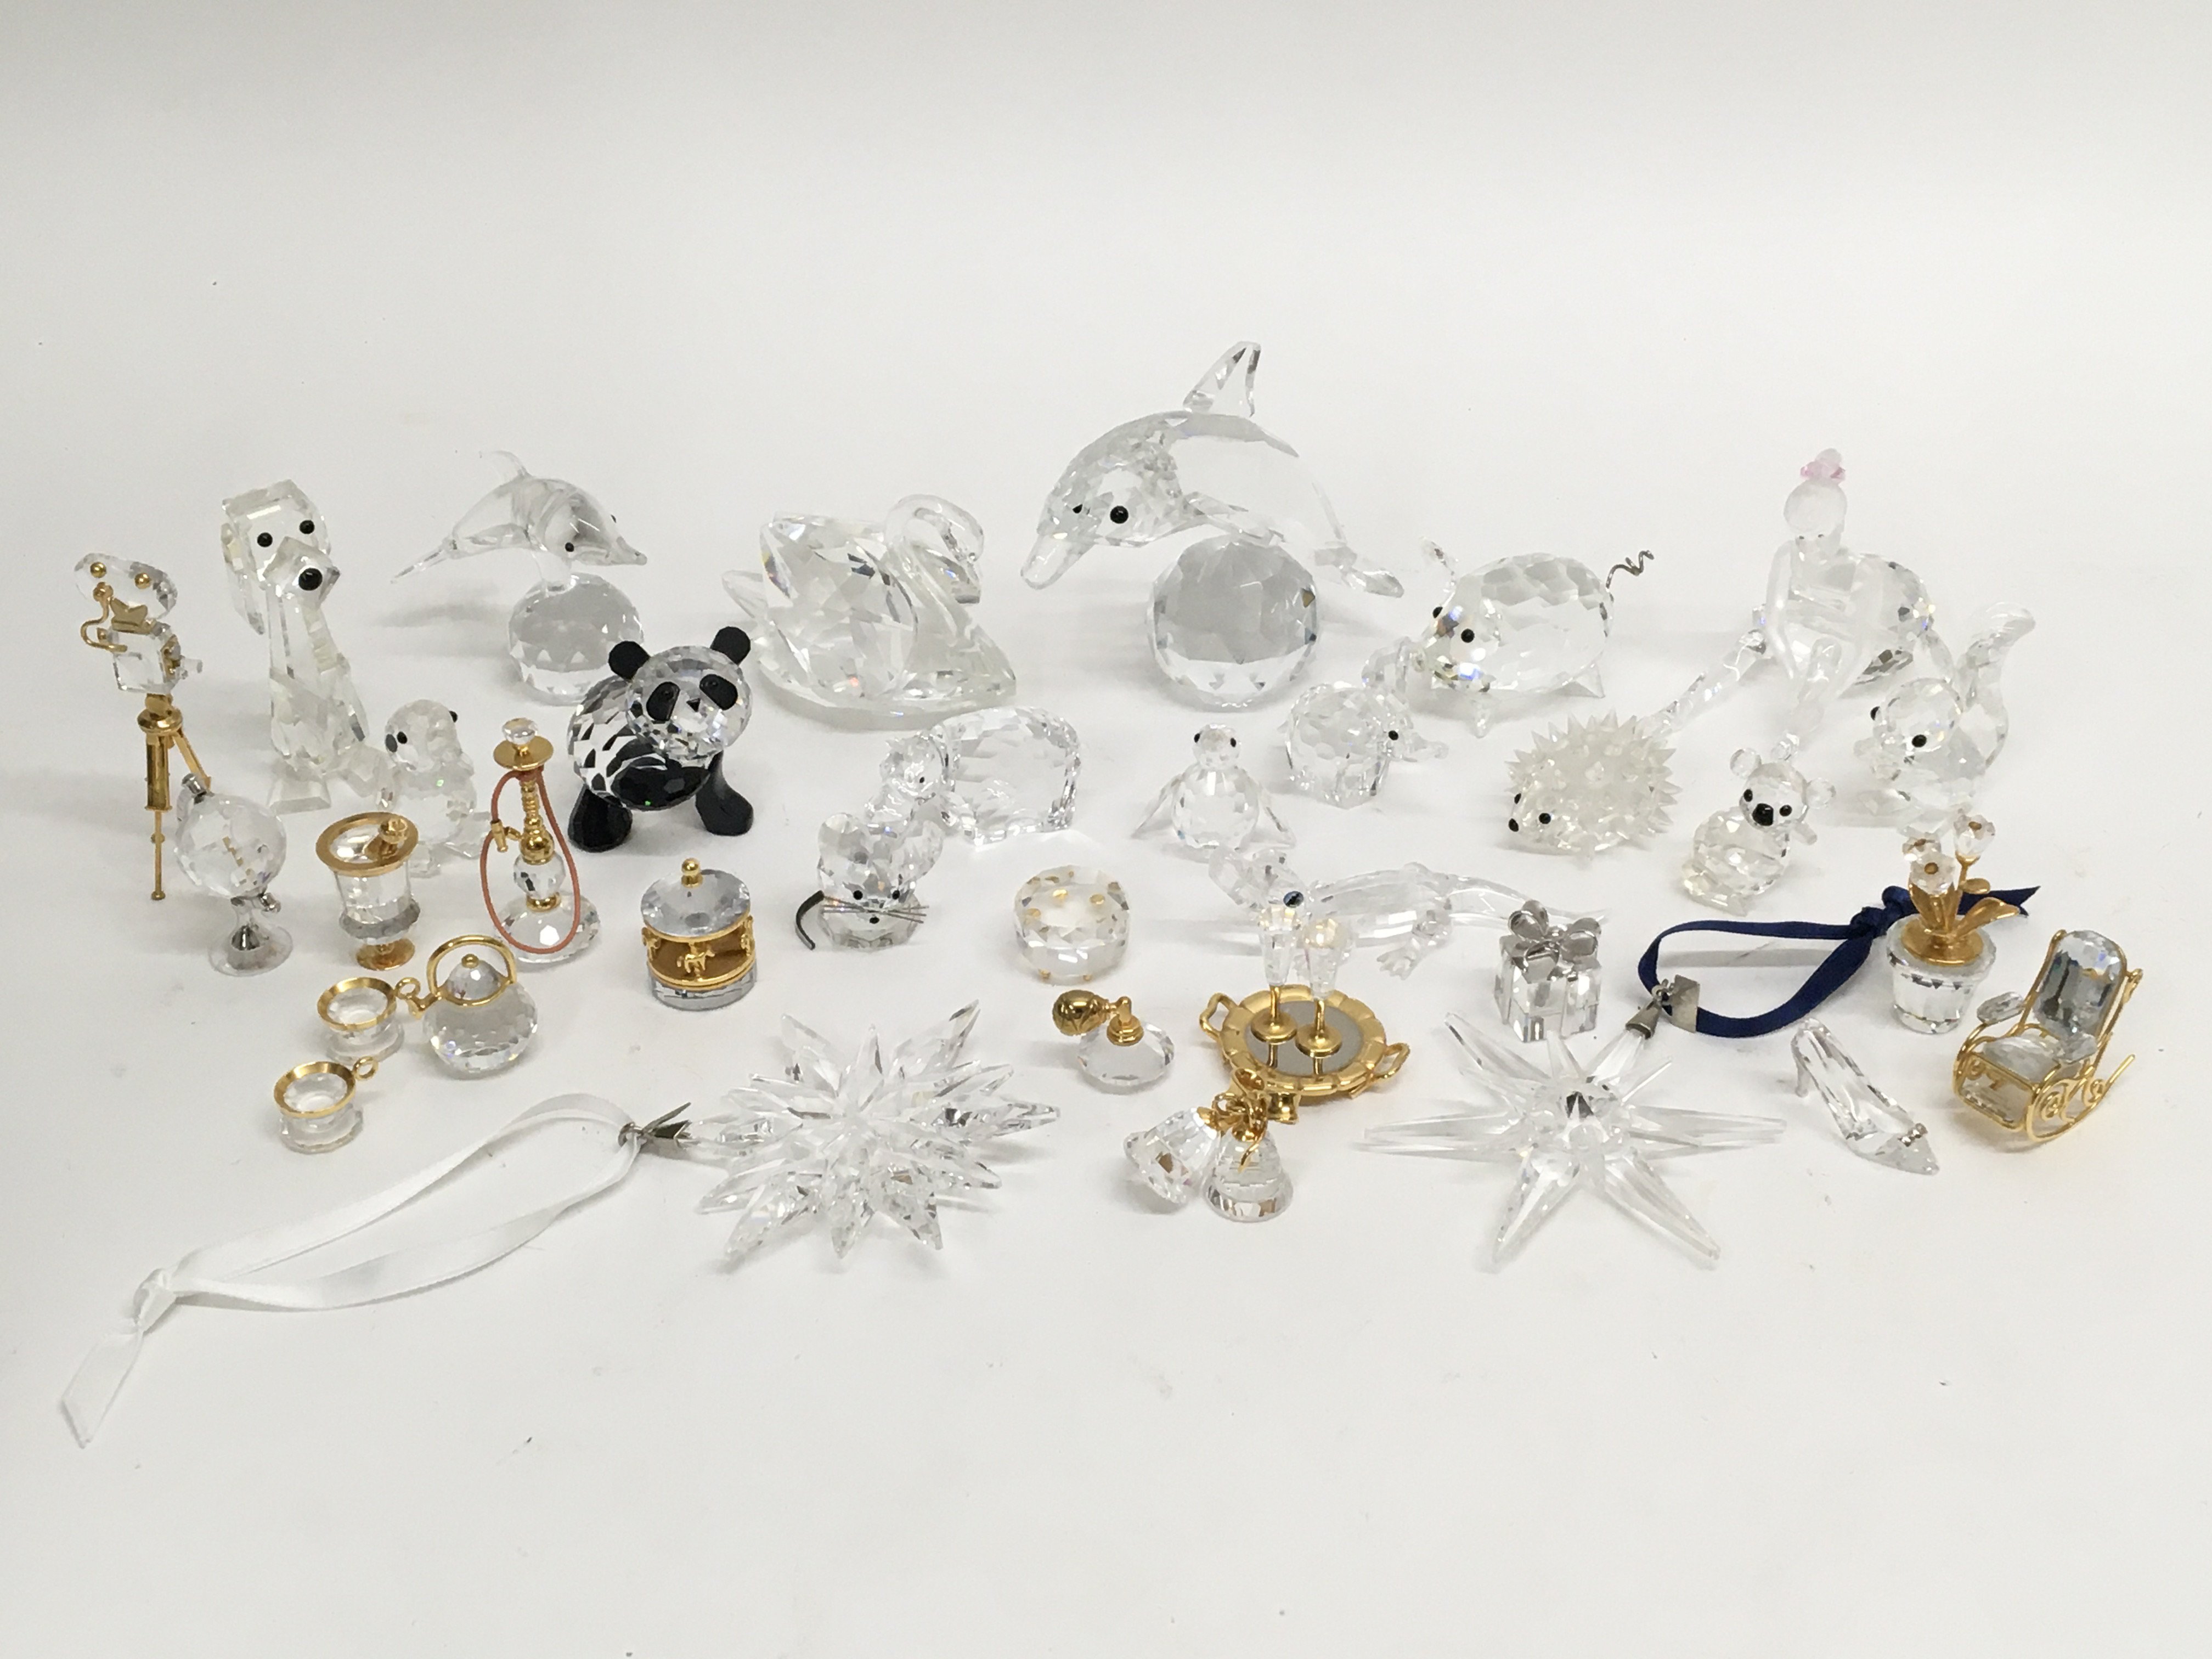 A collection of Swarovski glass ornaments including two hanging Christmas ornaments and conforming